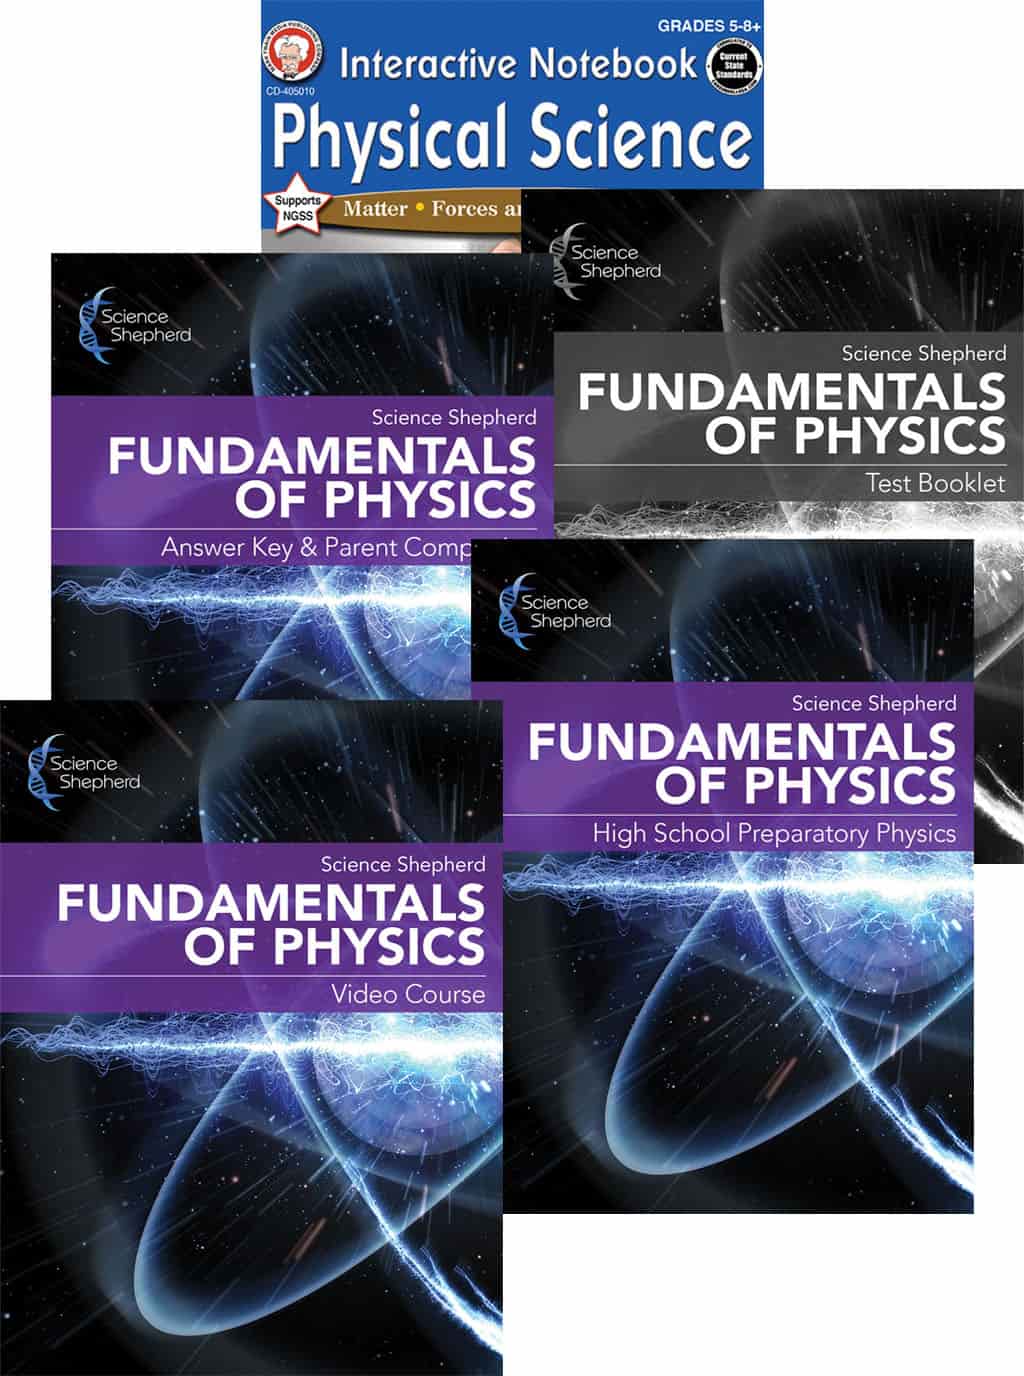 Physics curriculum homeschool 3-book set with textbook, tests, parent guide, videos, lab manual